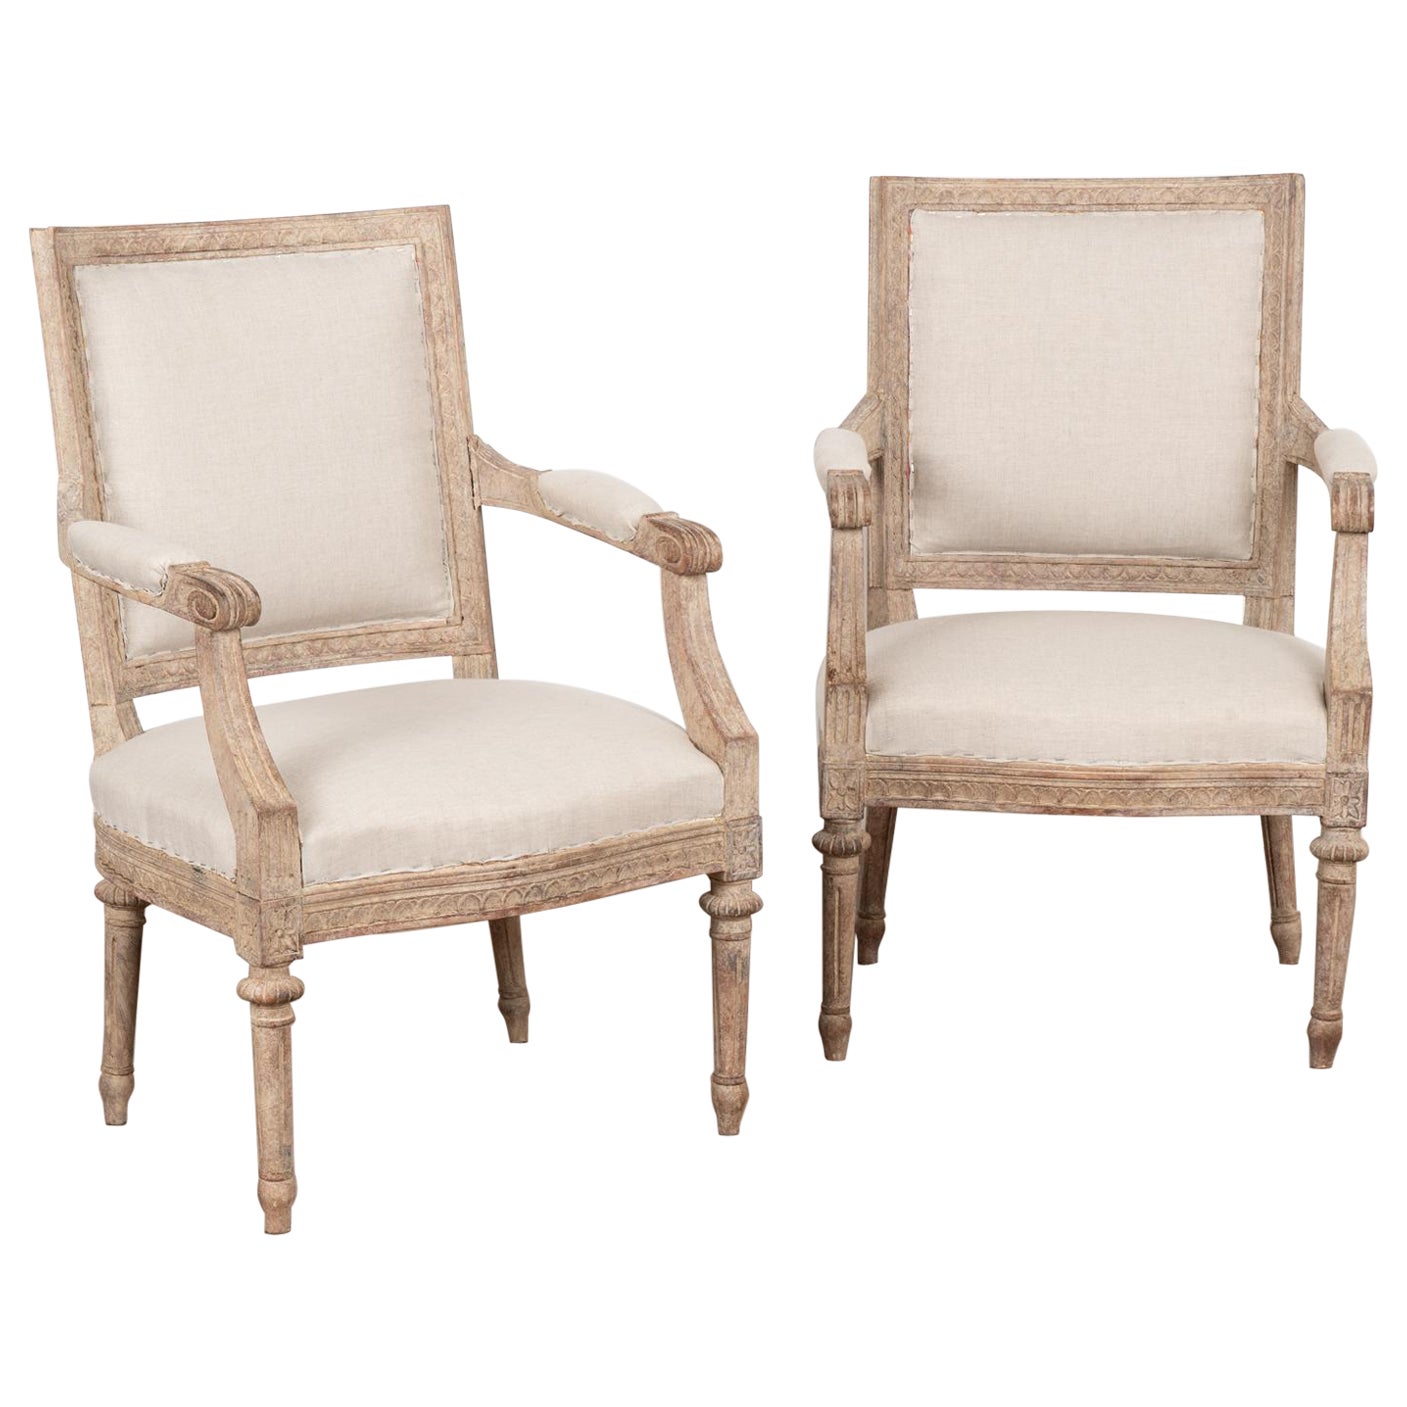 Pair, White Painted Gustavian Style Armchairs, Sweden circa 1900's